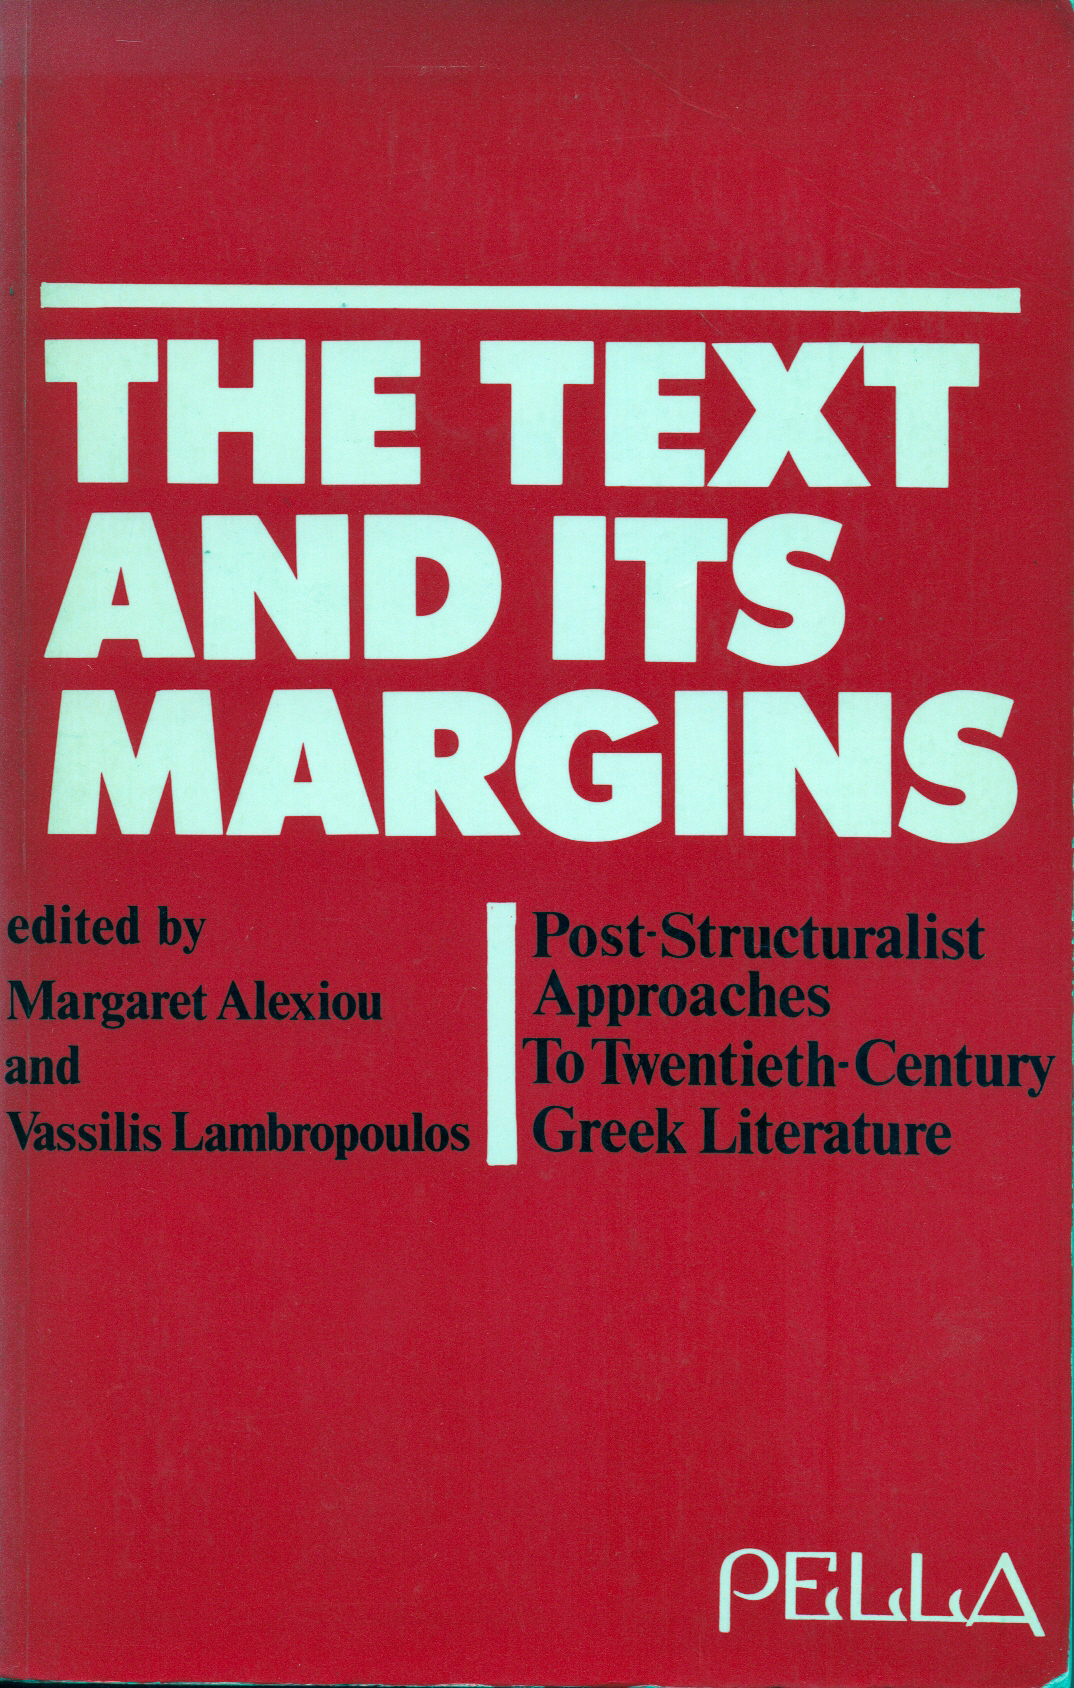 The text and its margins